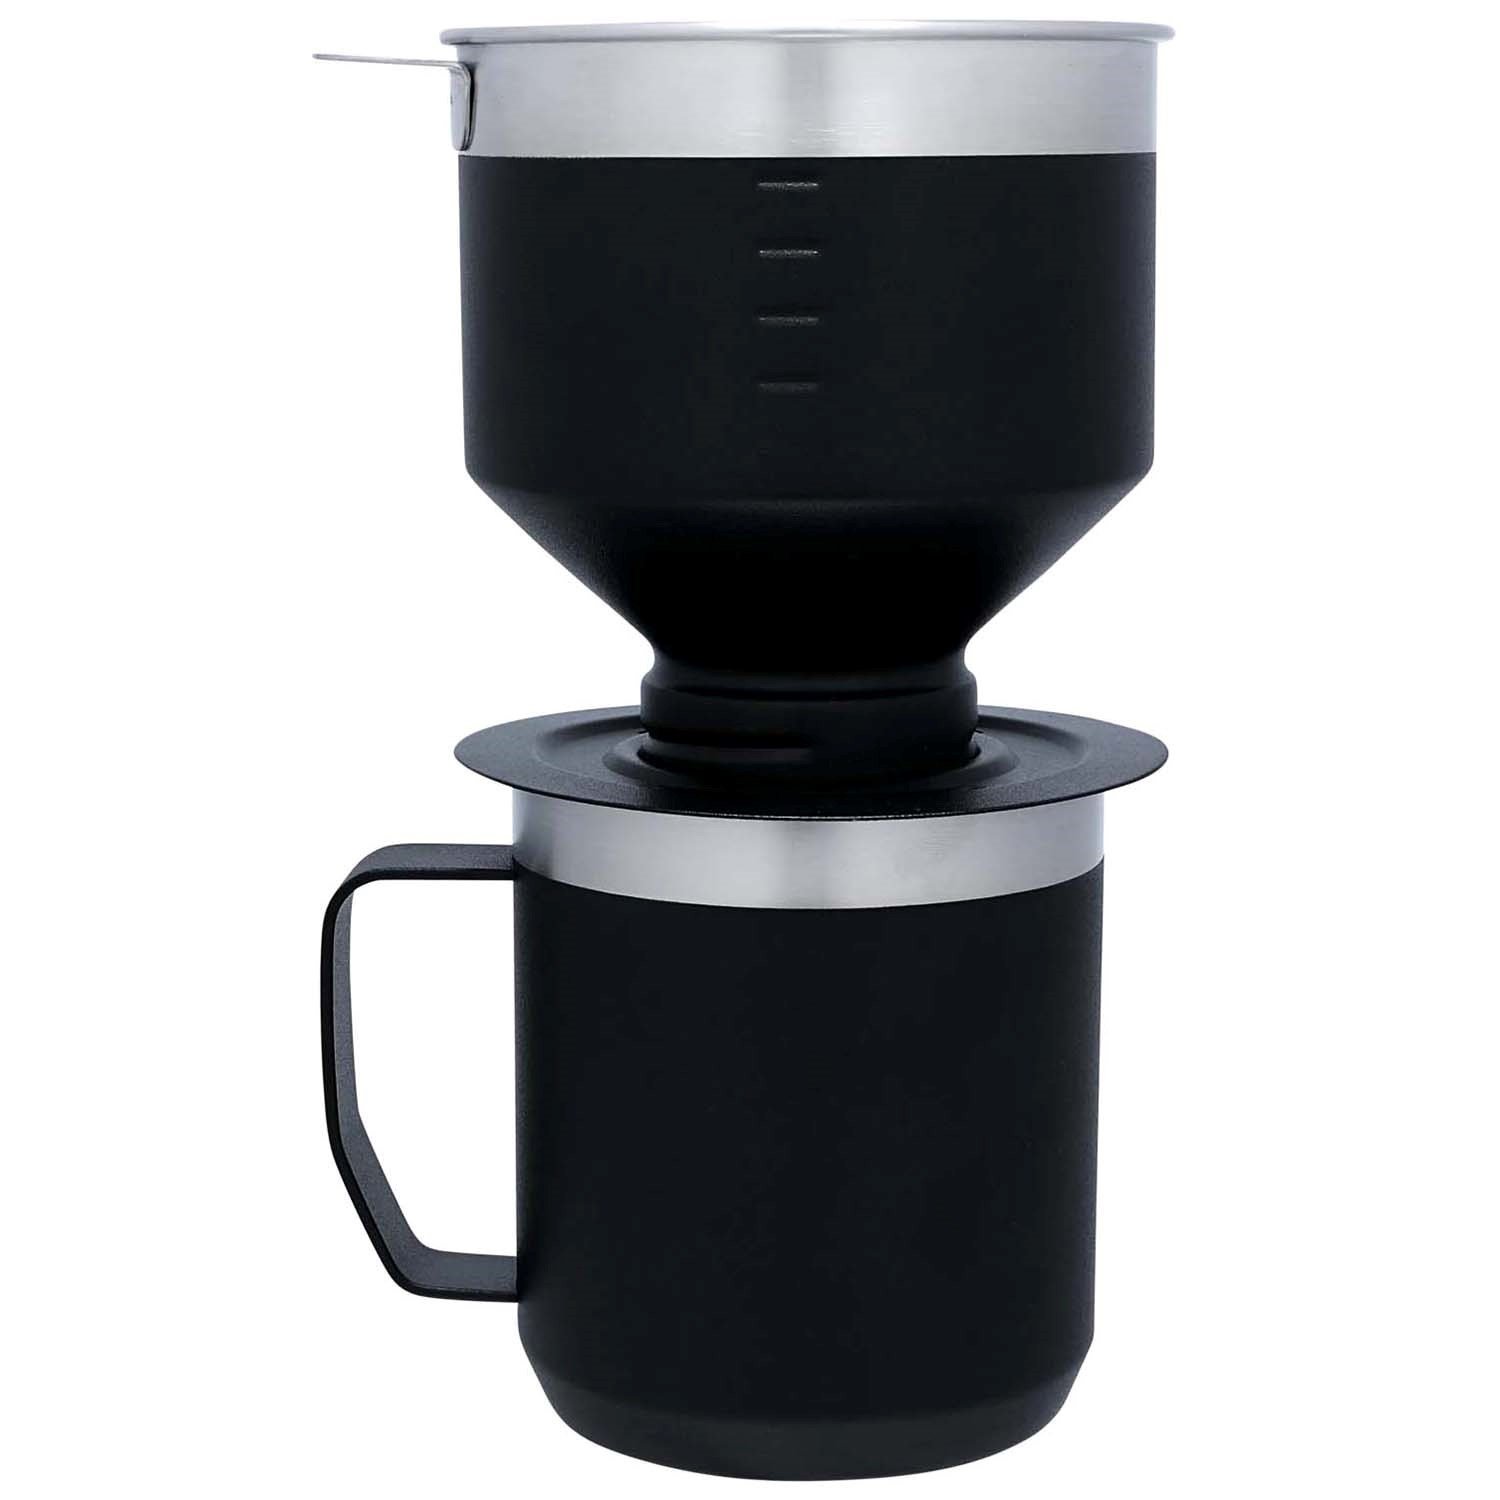 https://images.evo.com/imgp/zoom/233777/962027/stanley-the-camp-pour-over-set-.jpg